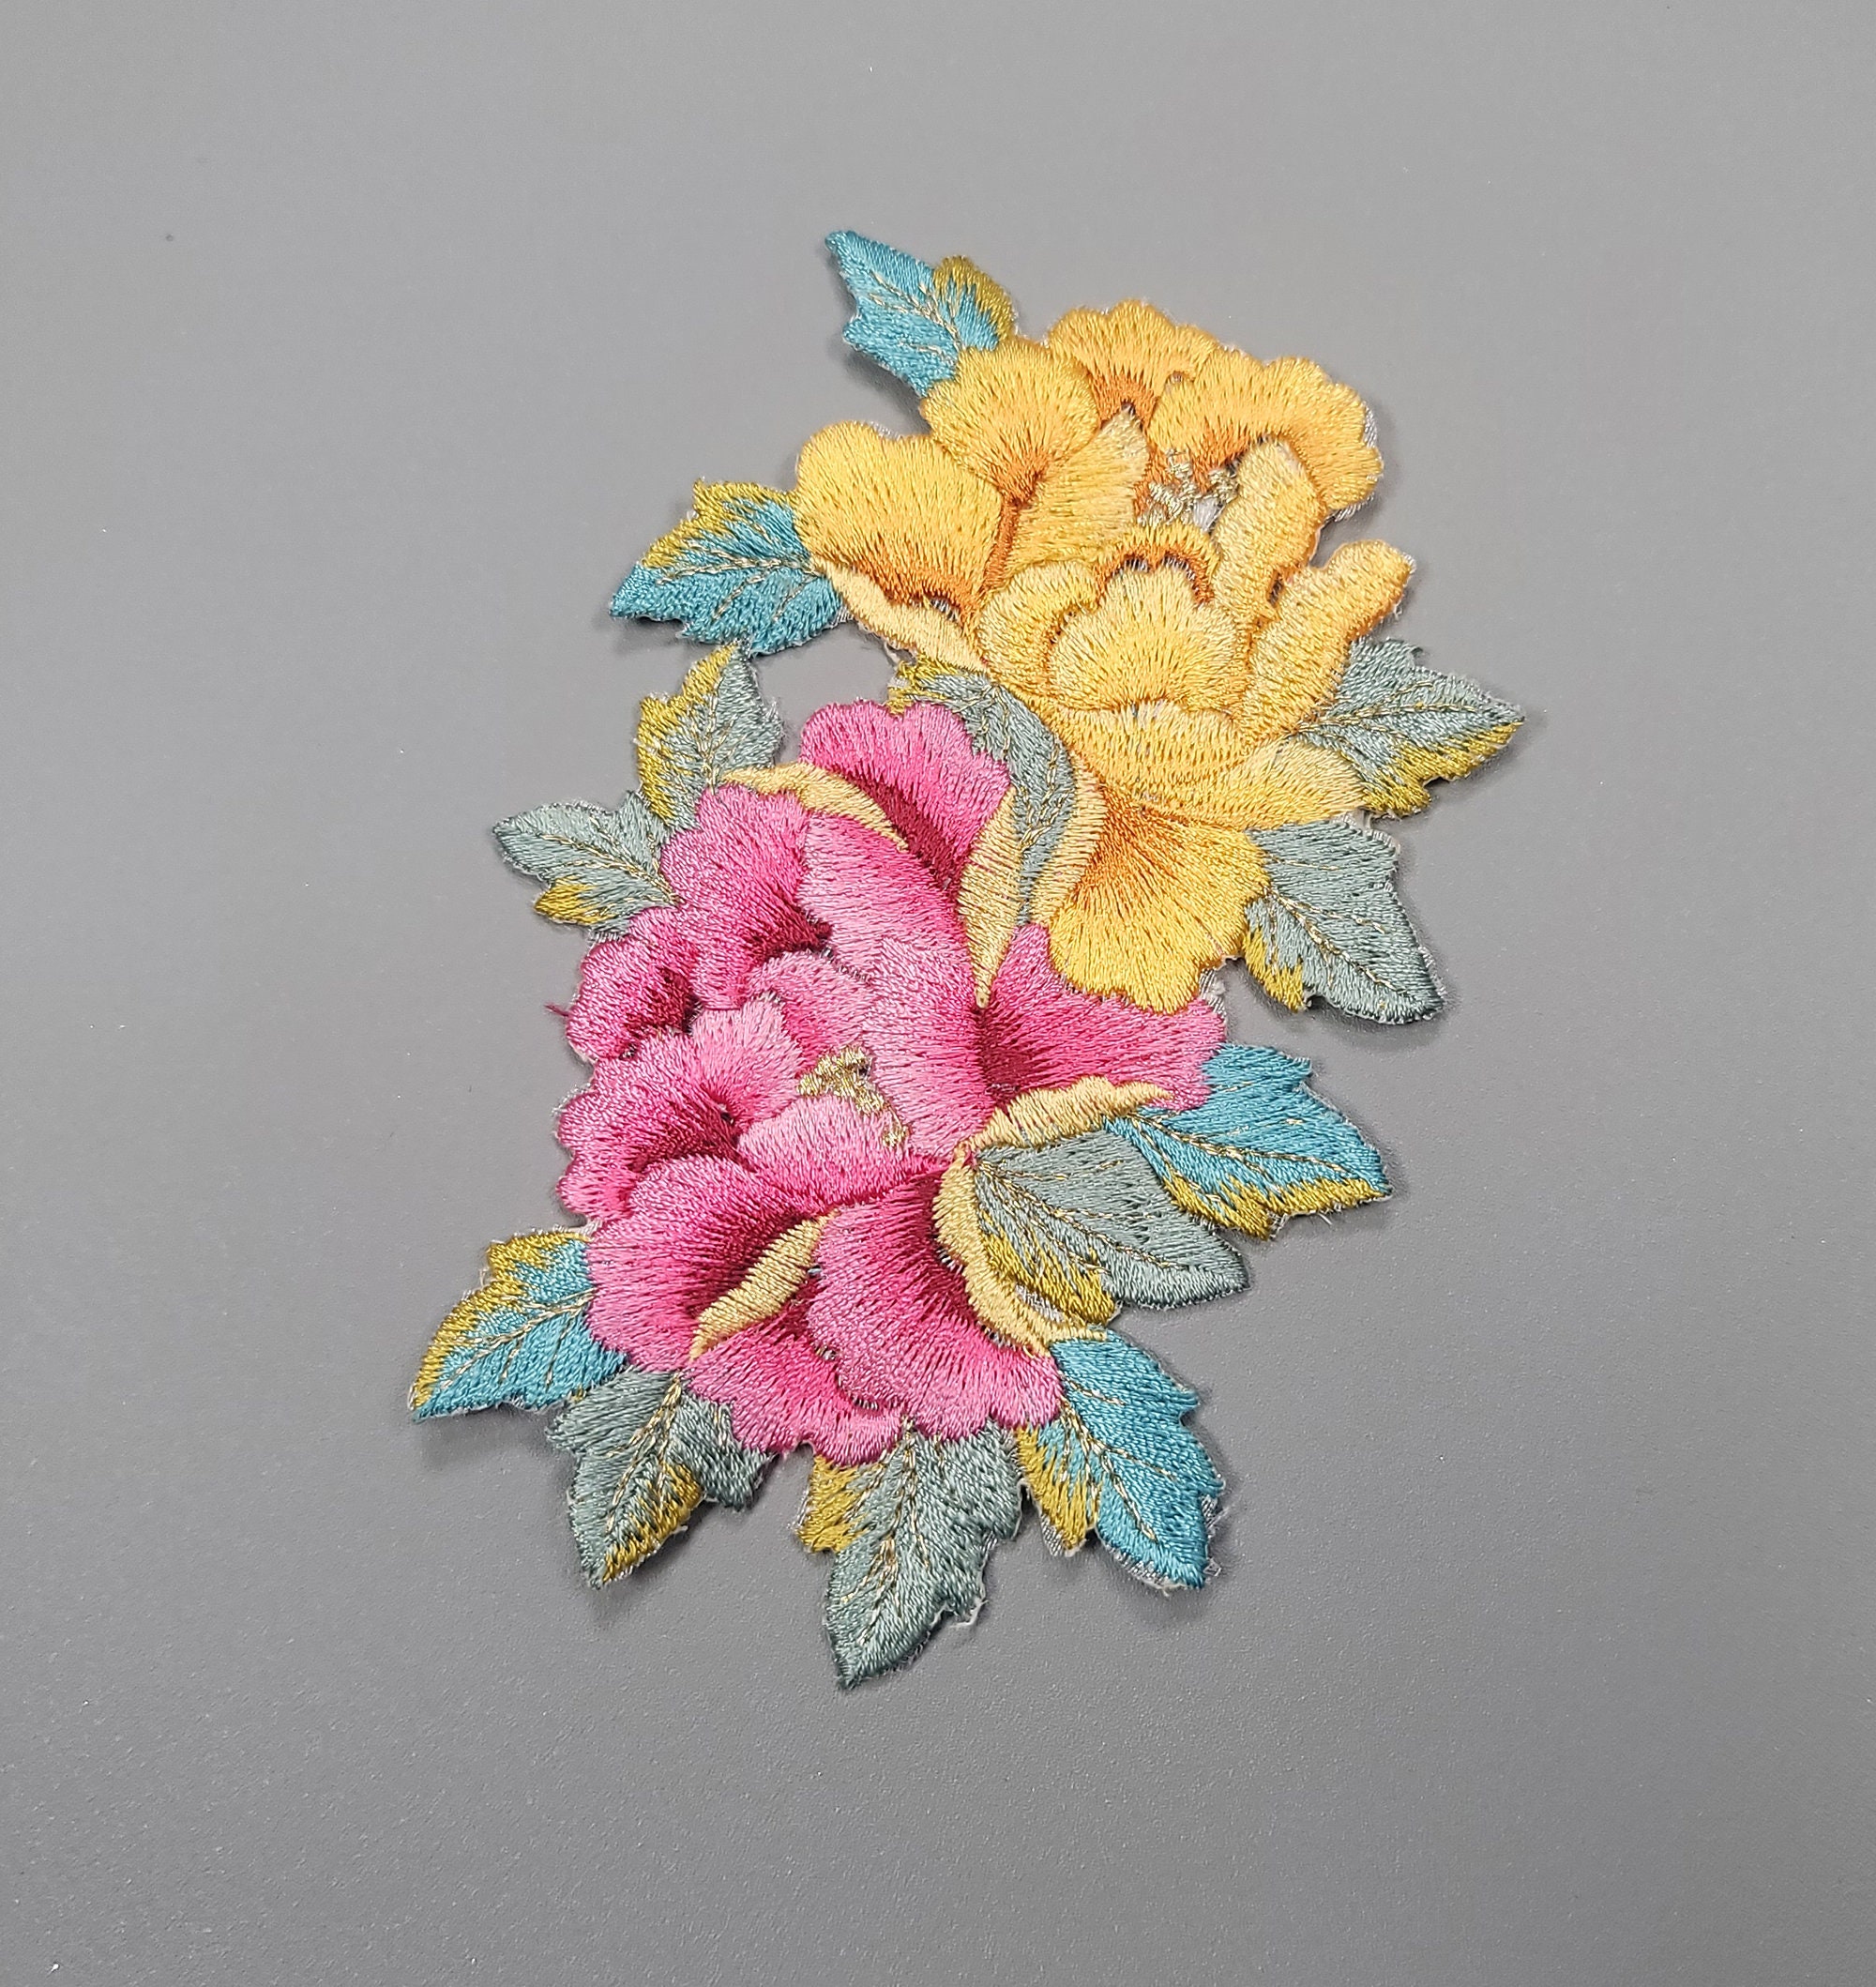 Set of 4 Korean Traditional Flower Embroidery Patches – RimKim Studio